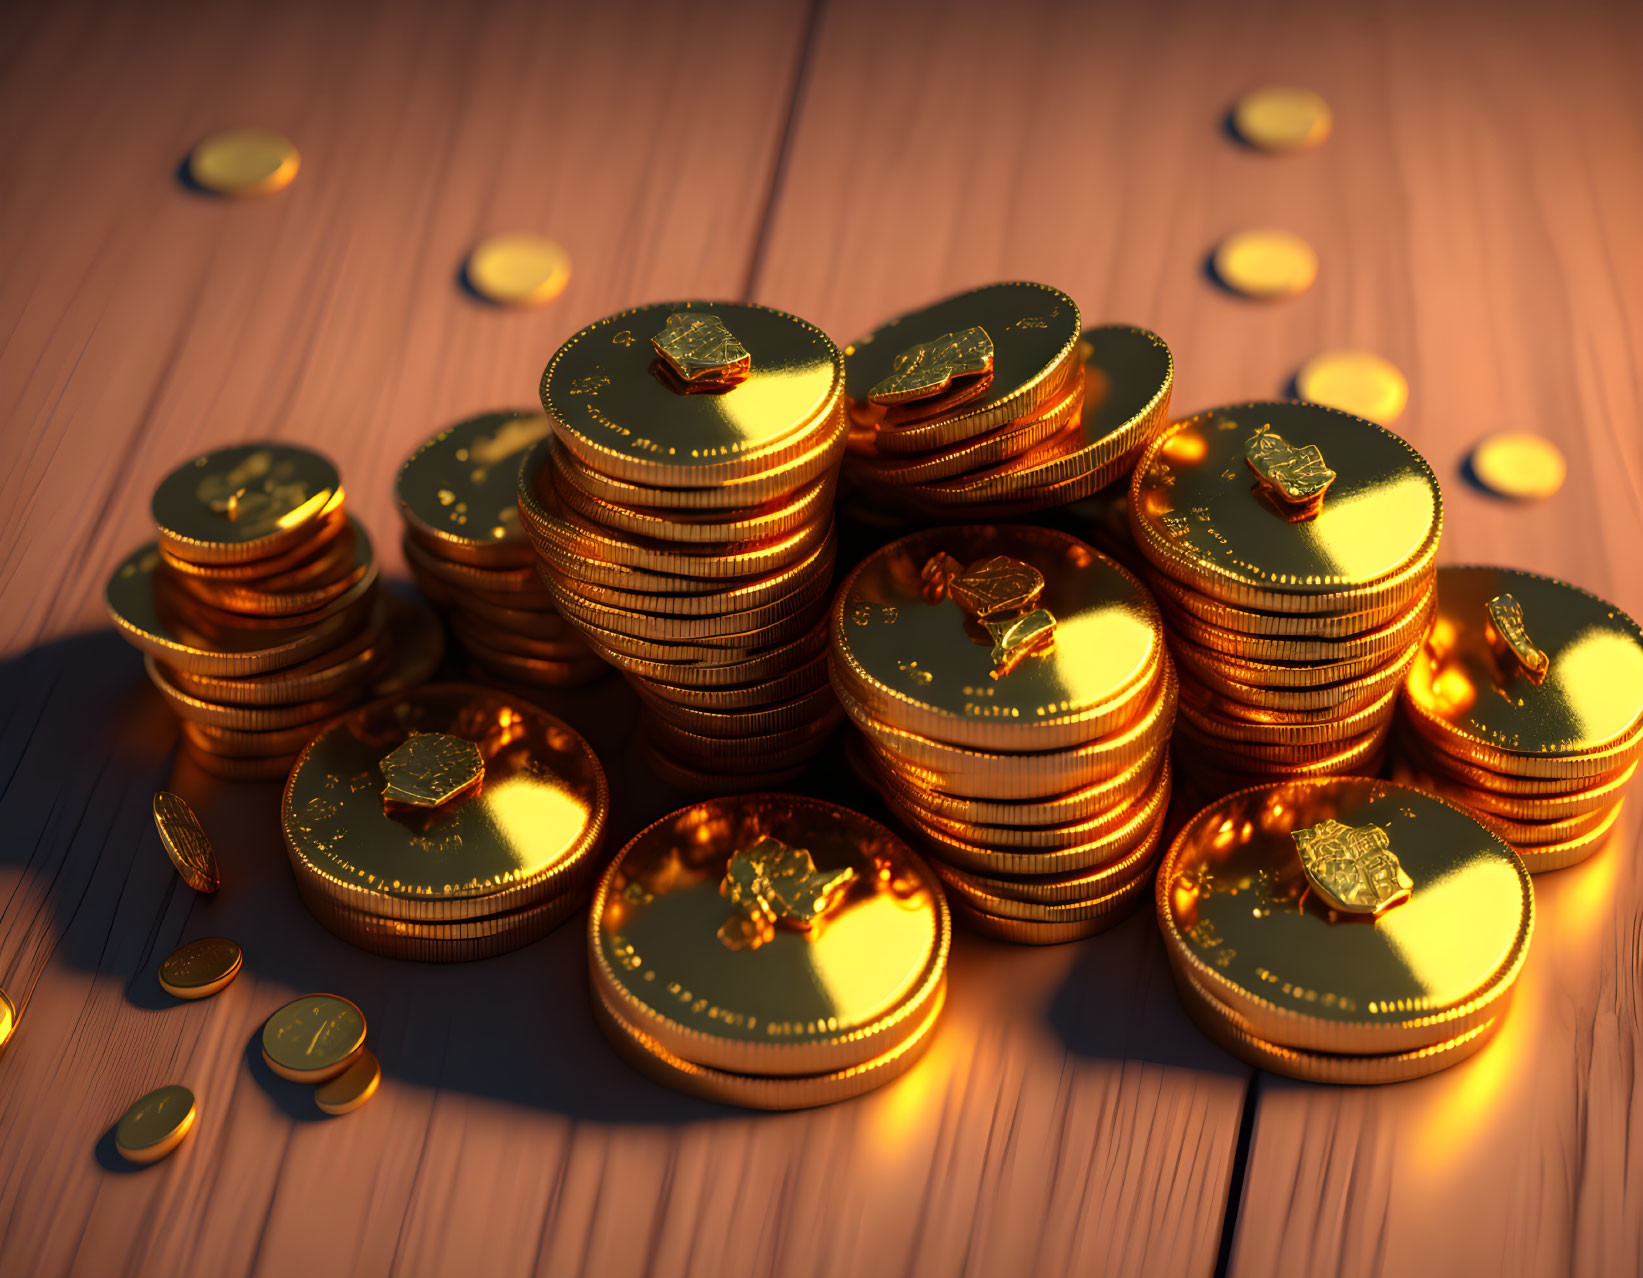 Golden coins with embossed designs on wooden surface lit by warm light